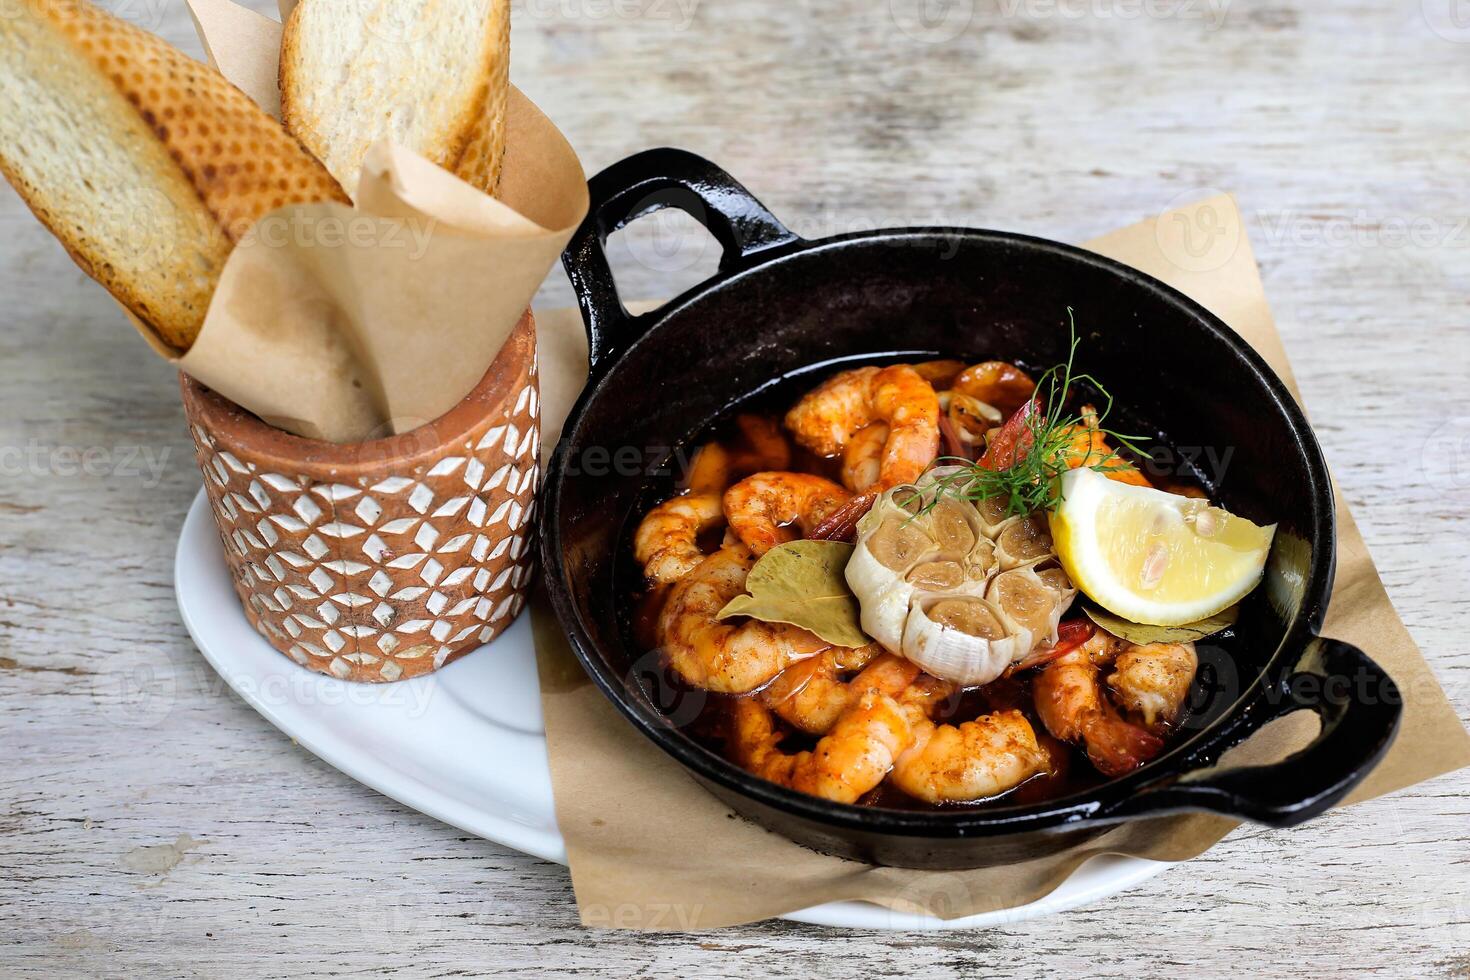 Sizzling Gambas Al Pil Pil with garlic bread served in a dish isolated on grey background side view of snacks photo